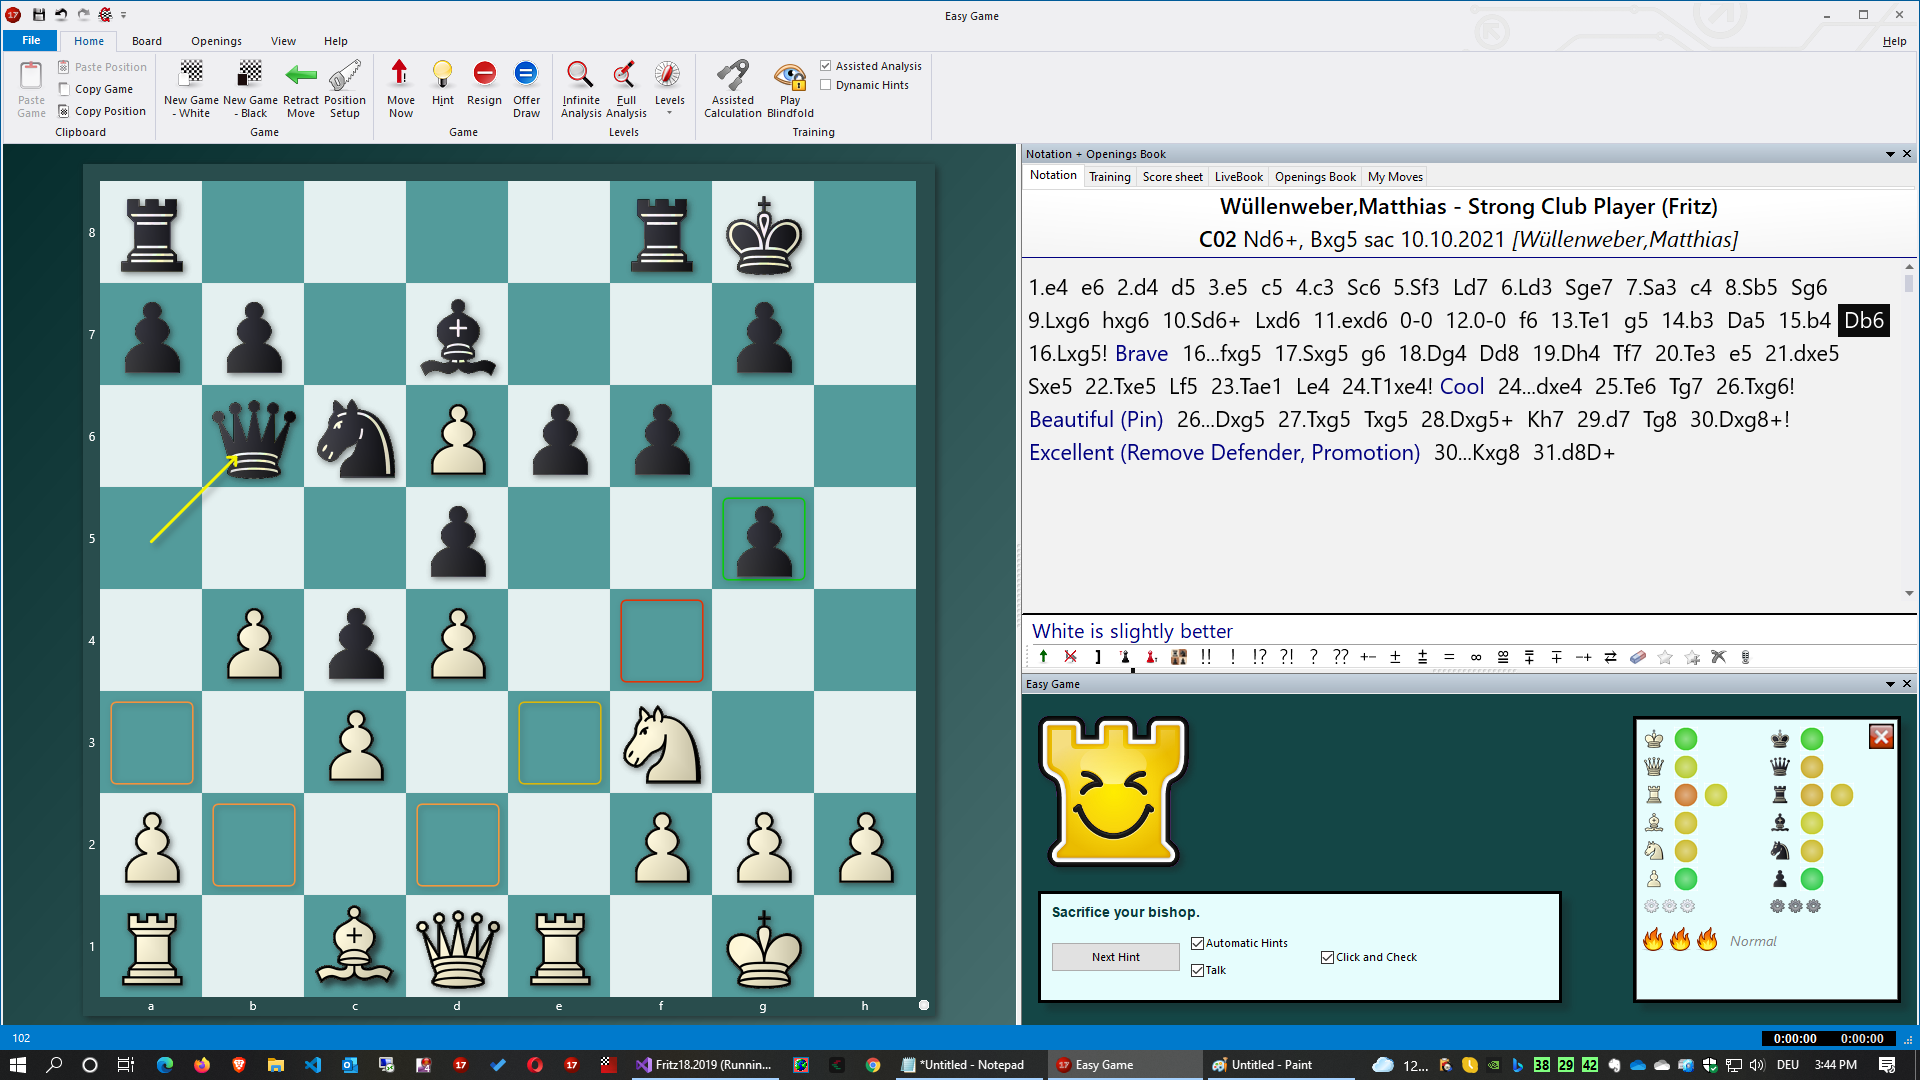 Fritz Powerbook Chess Game Database 2018 - Chess Database Software bundled  with Chess Masterpieces CD 